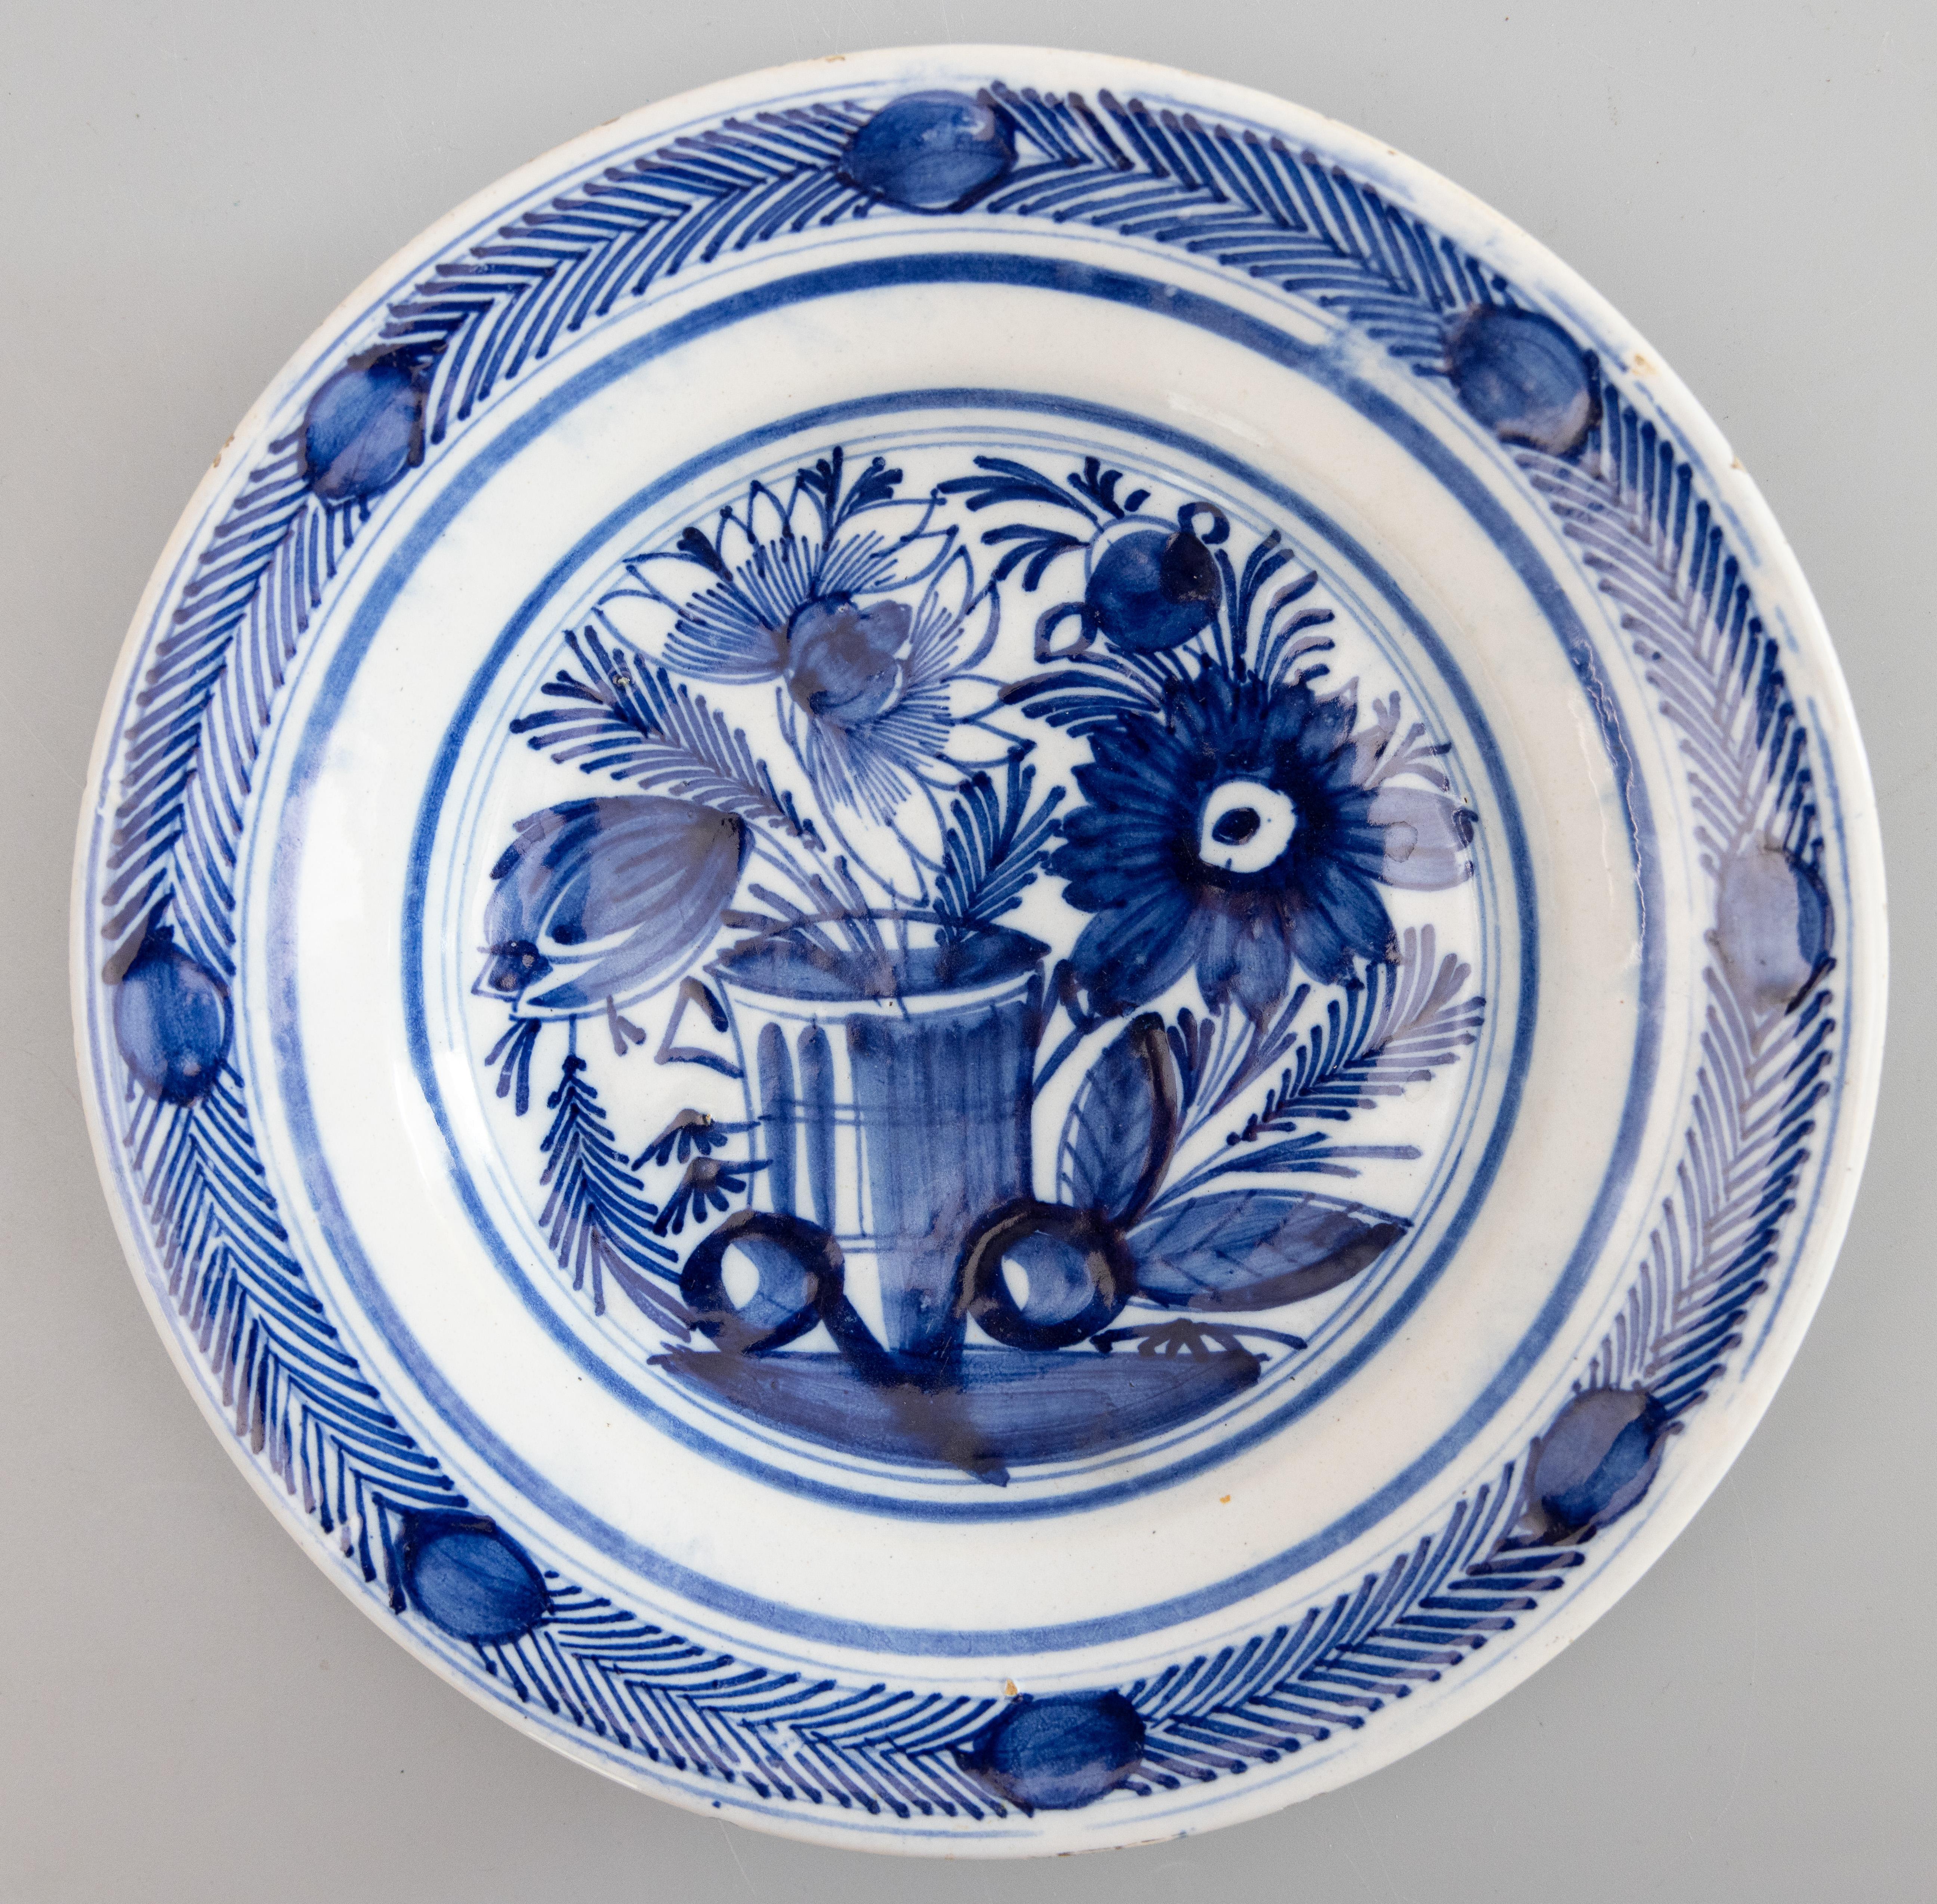 A gorgeous pair of antique 18th-Century Dutch Delft faience flower garden plates. These lovely plates have a hand painted floral and foliate design in vibrant cobalt blue and white. They would look fabulous displayed on a wall or in a cabinet.